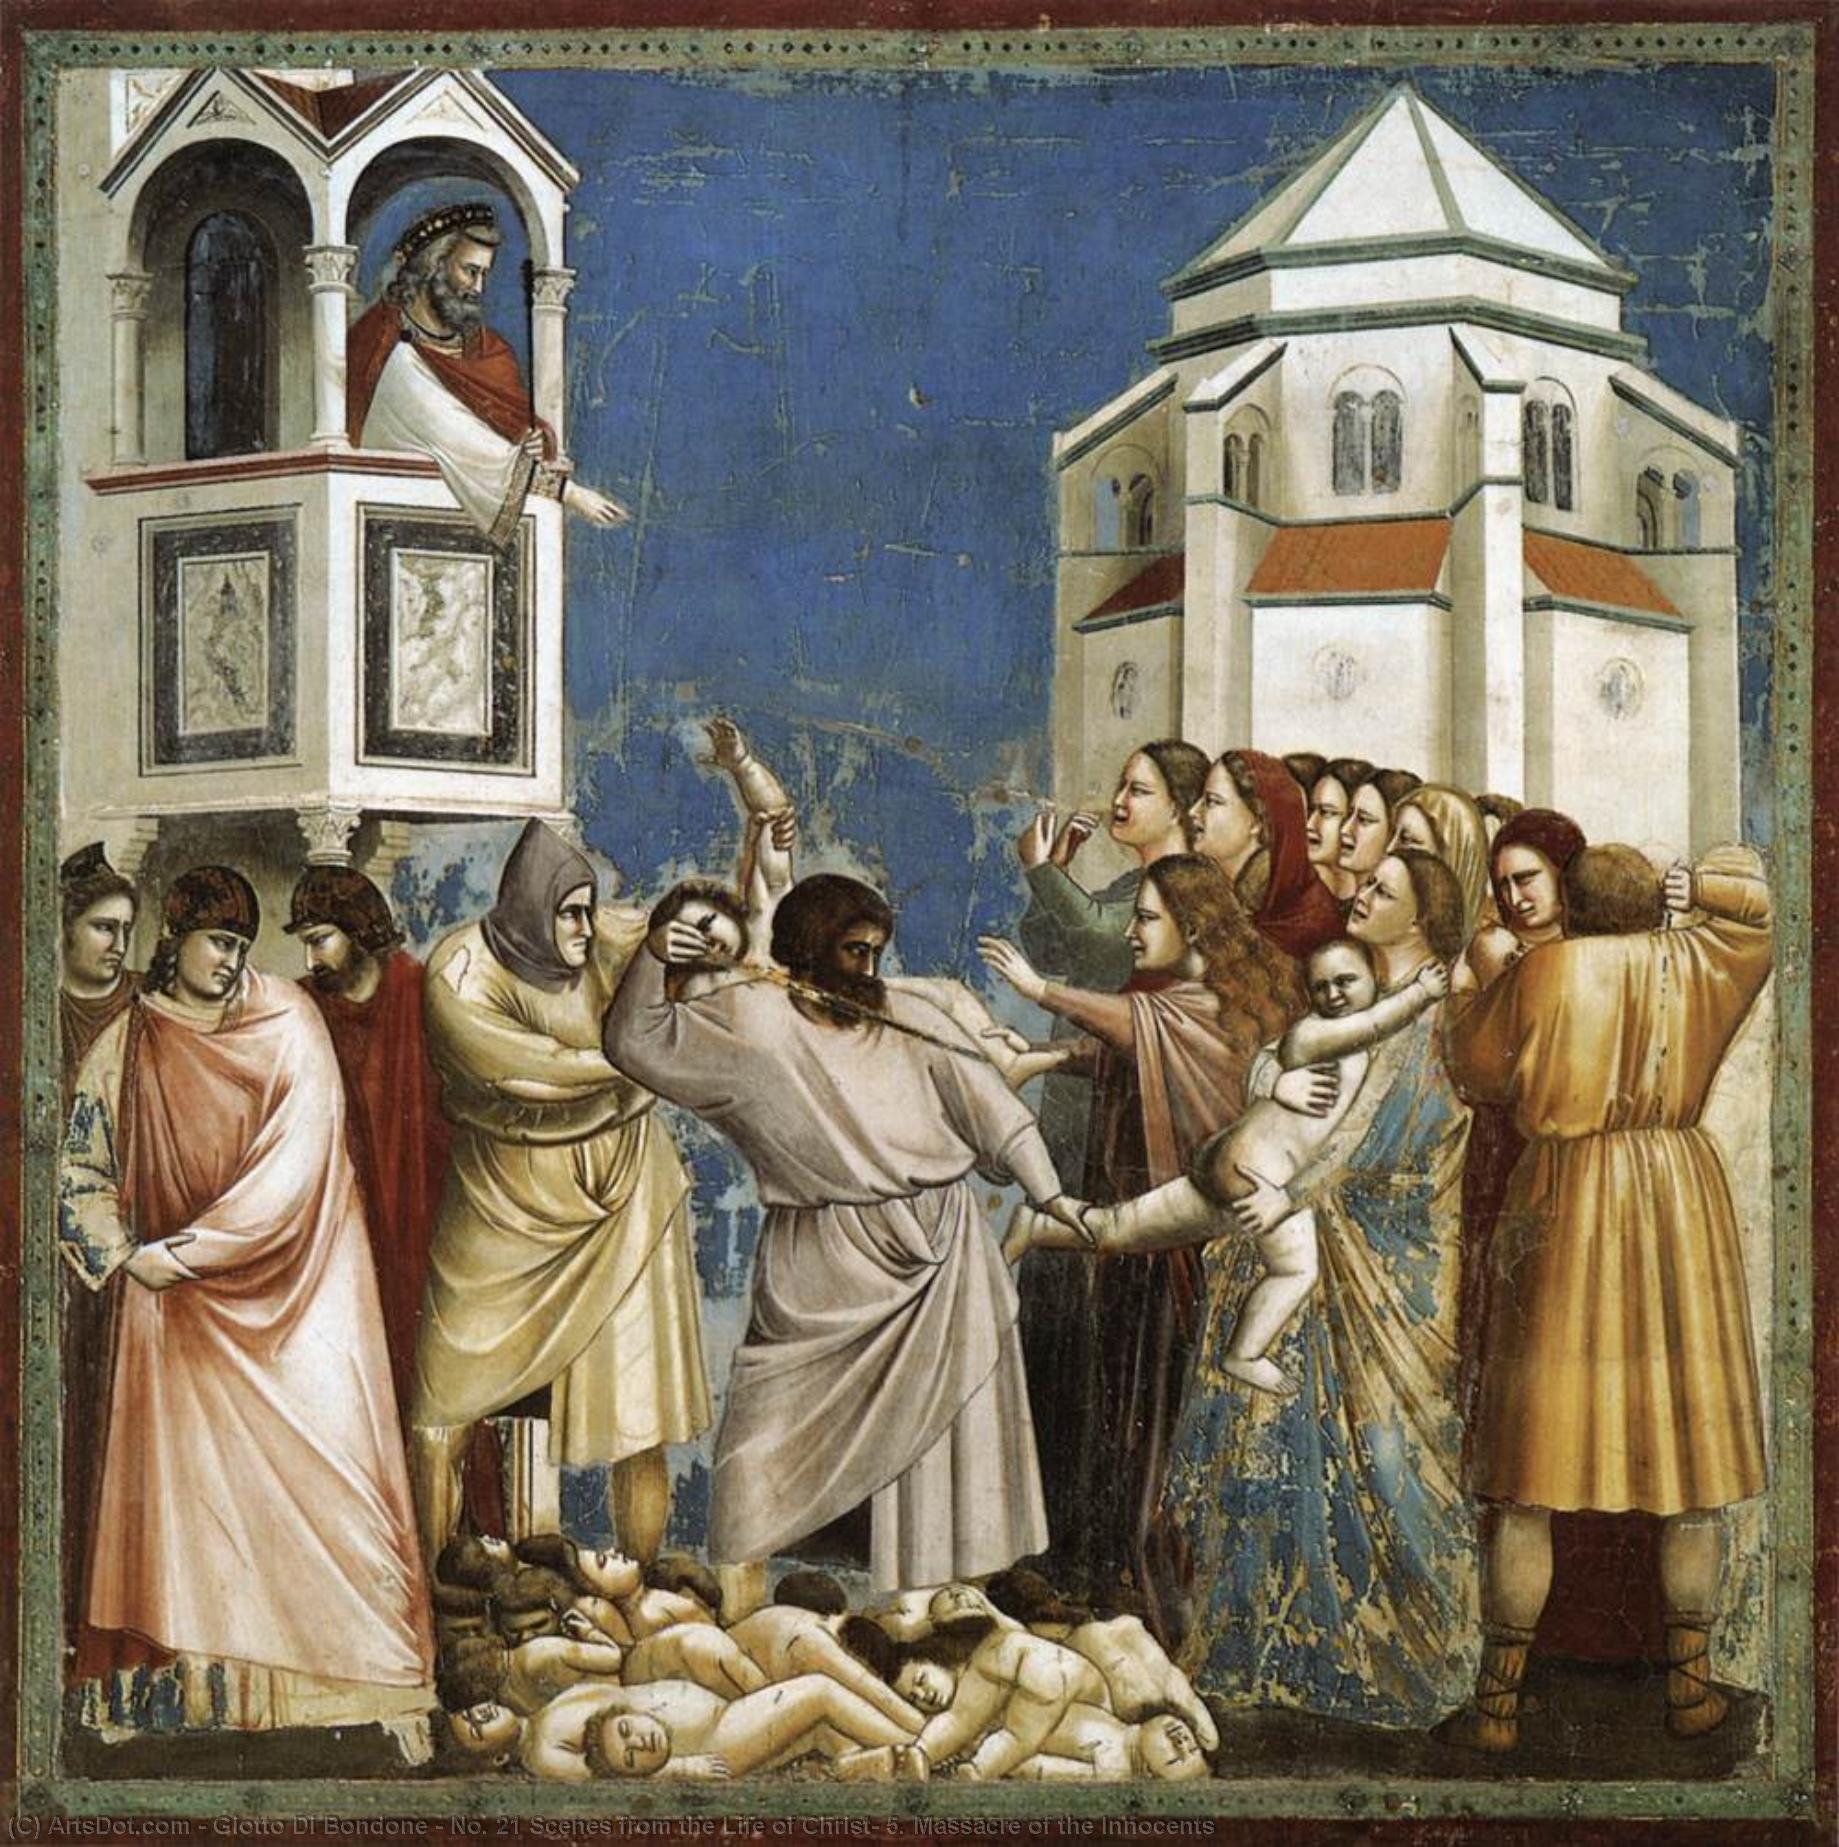 Buy Museum Art Reproductions No. 21 Scenes from the Life of Christ: 5. Massacre of the Innocents, 1304 by Giotto Di Bondone (1267-1337, Italy) | ArtsDot.com